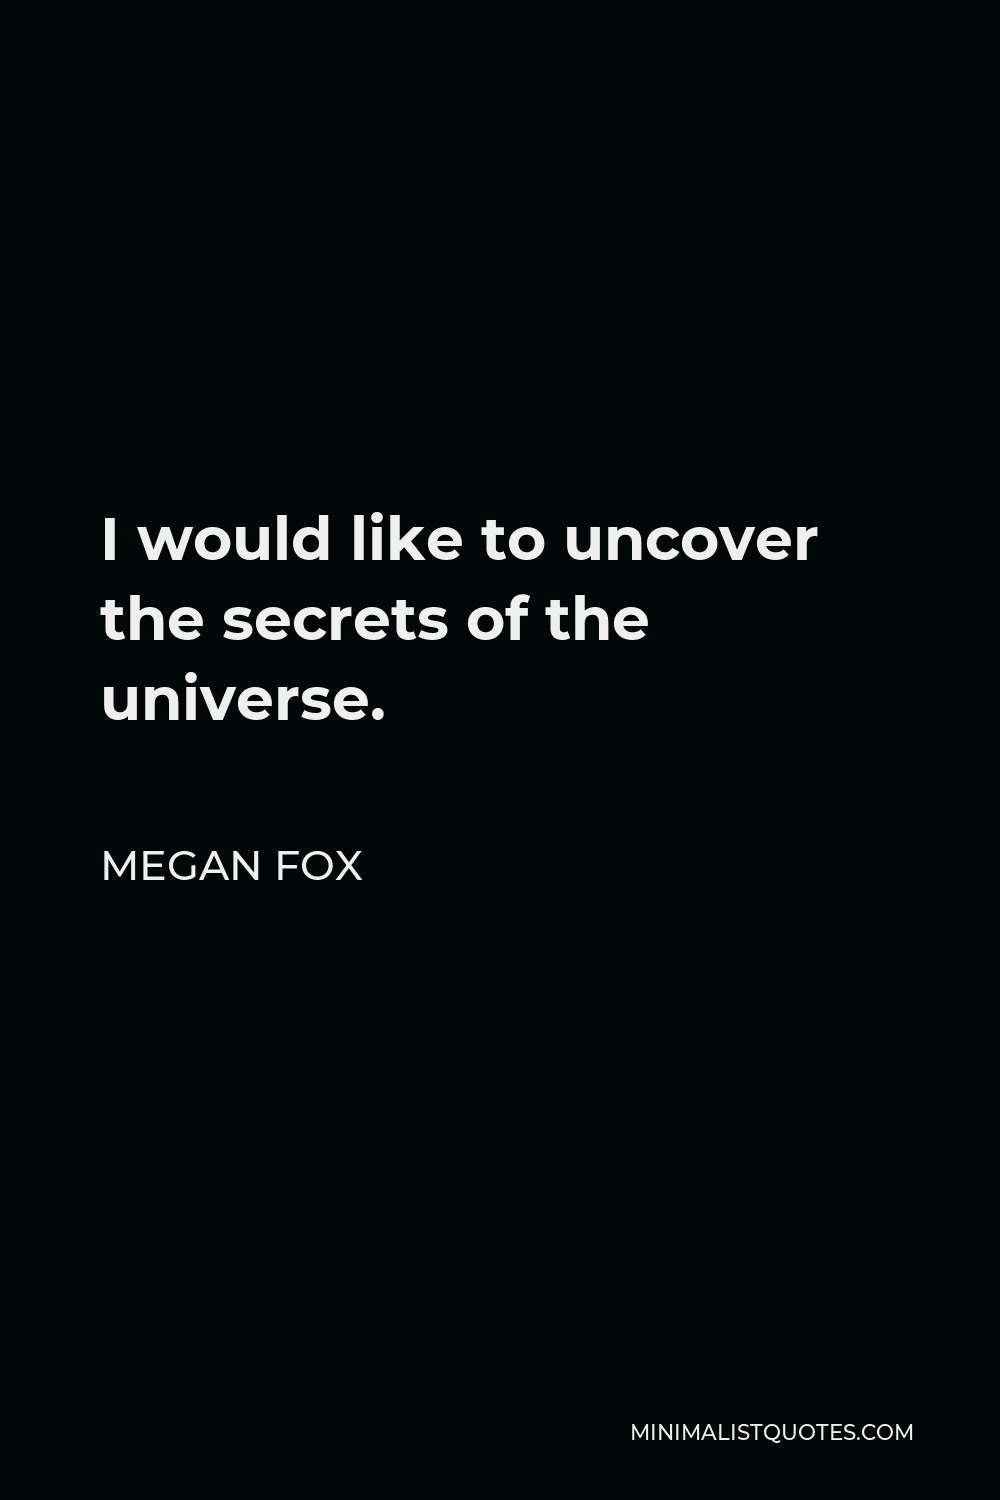 Megan Fox Quote - I would like to uncover the secrets of the universe.